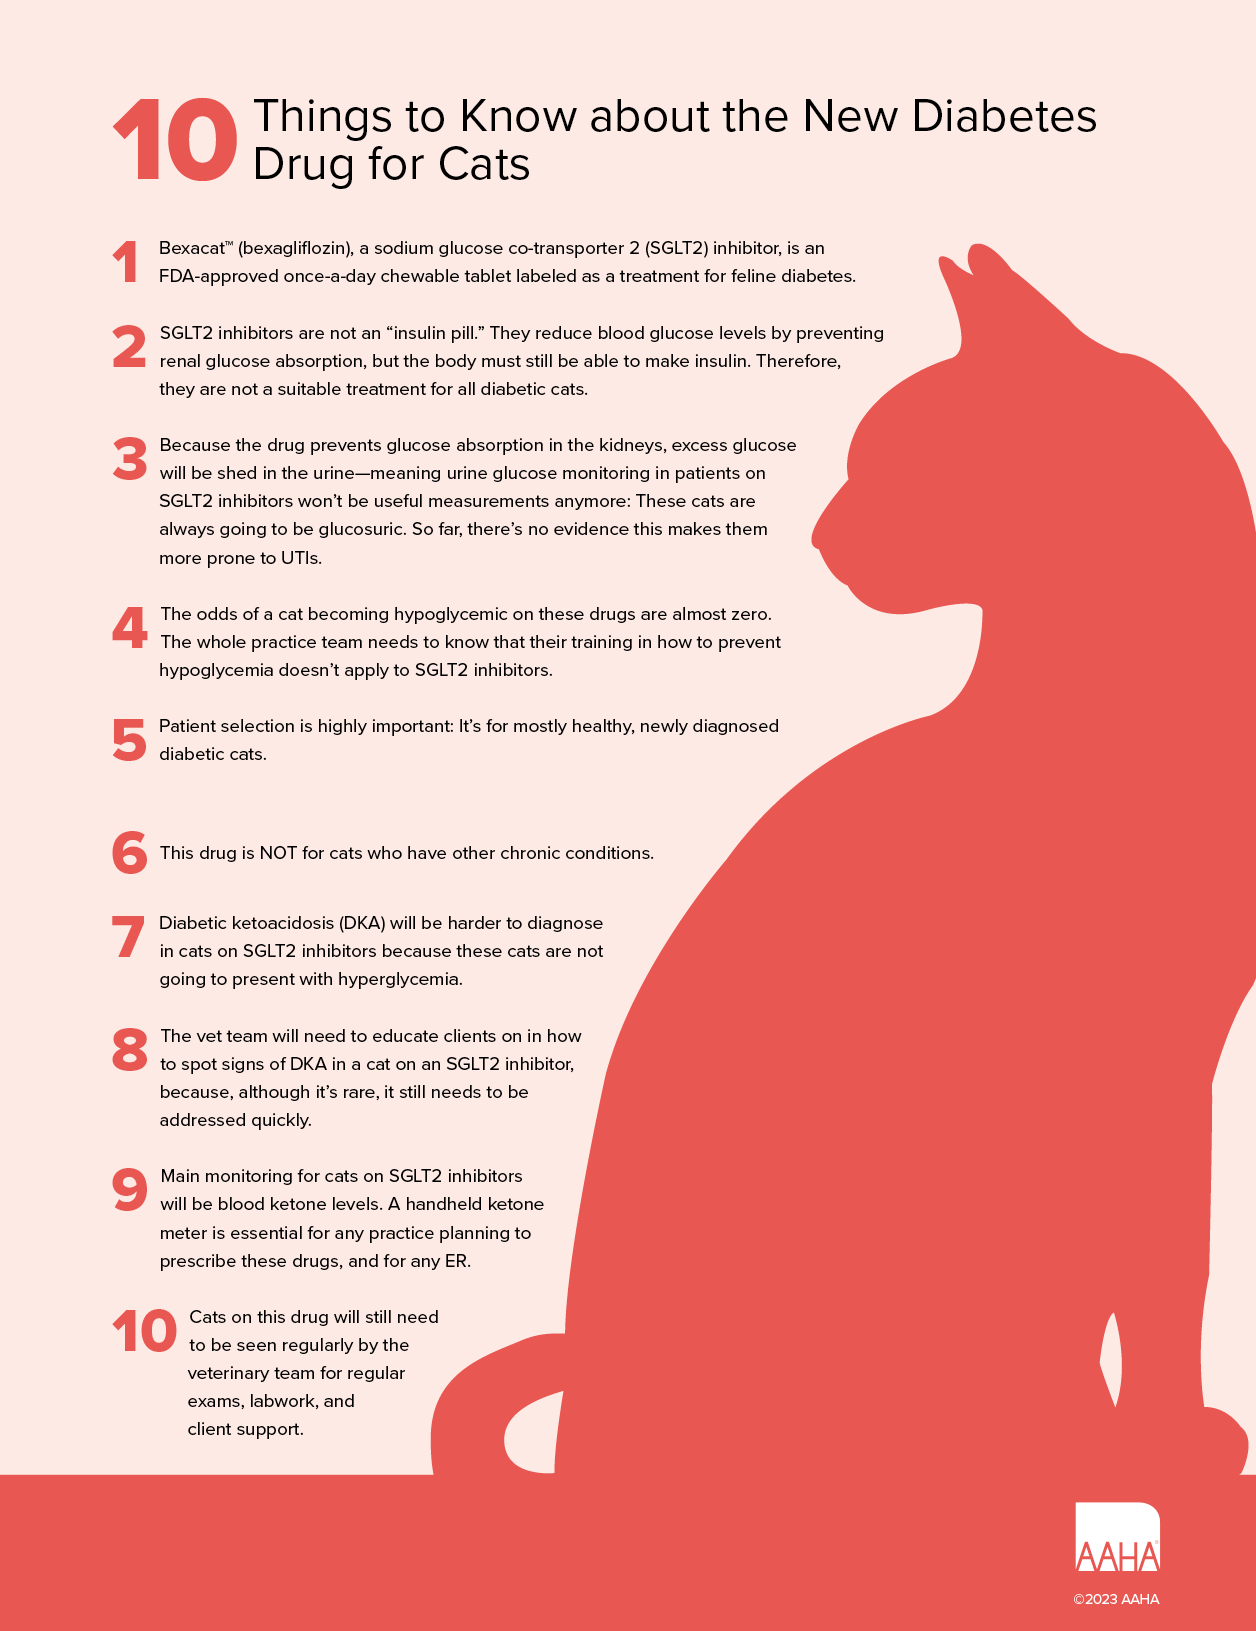 10_Things_To_Know_Bexacat.png